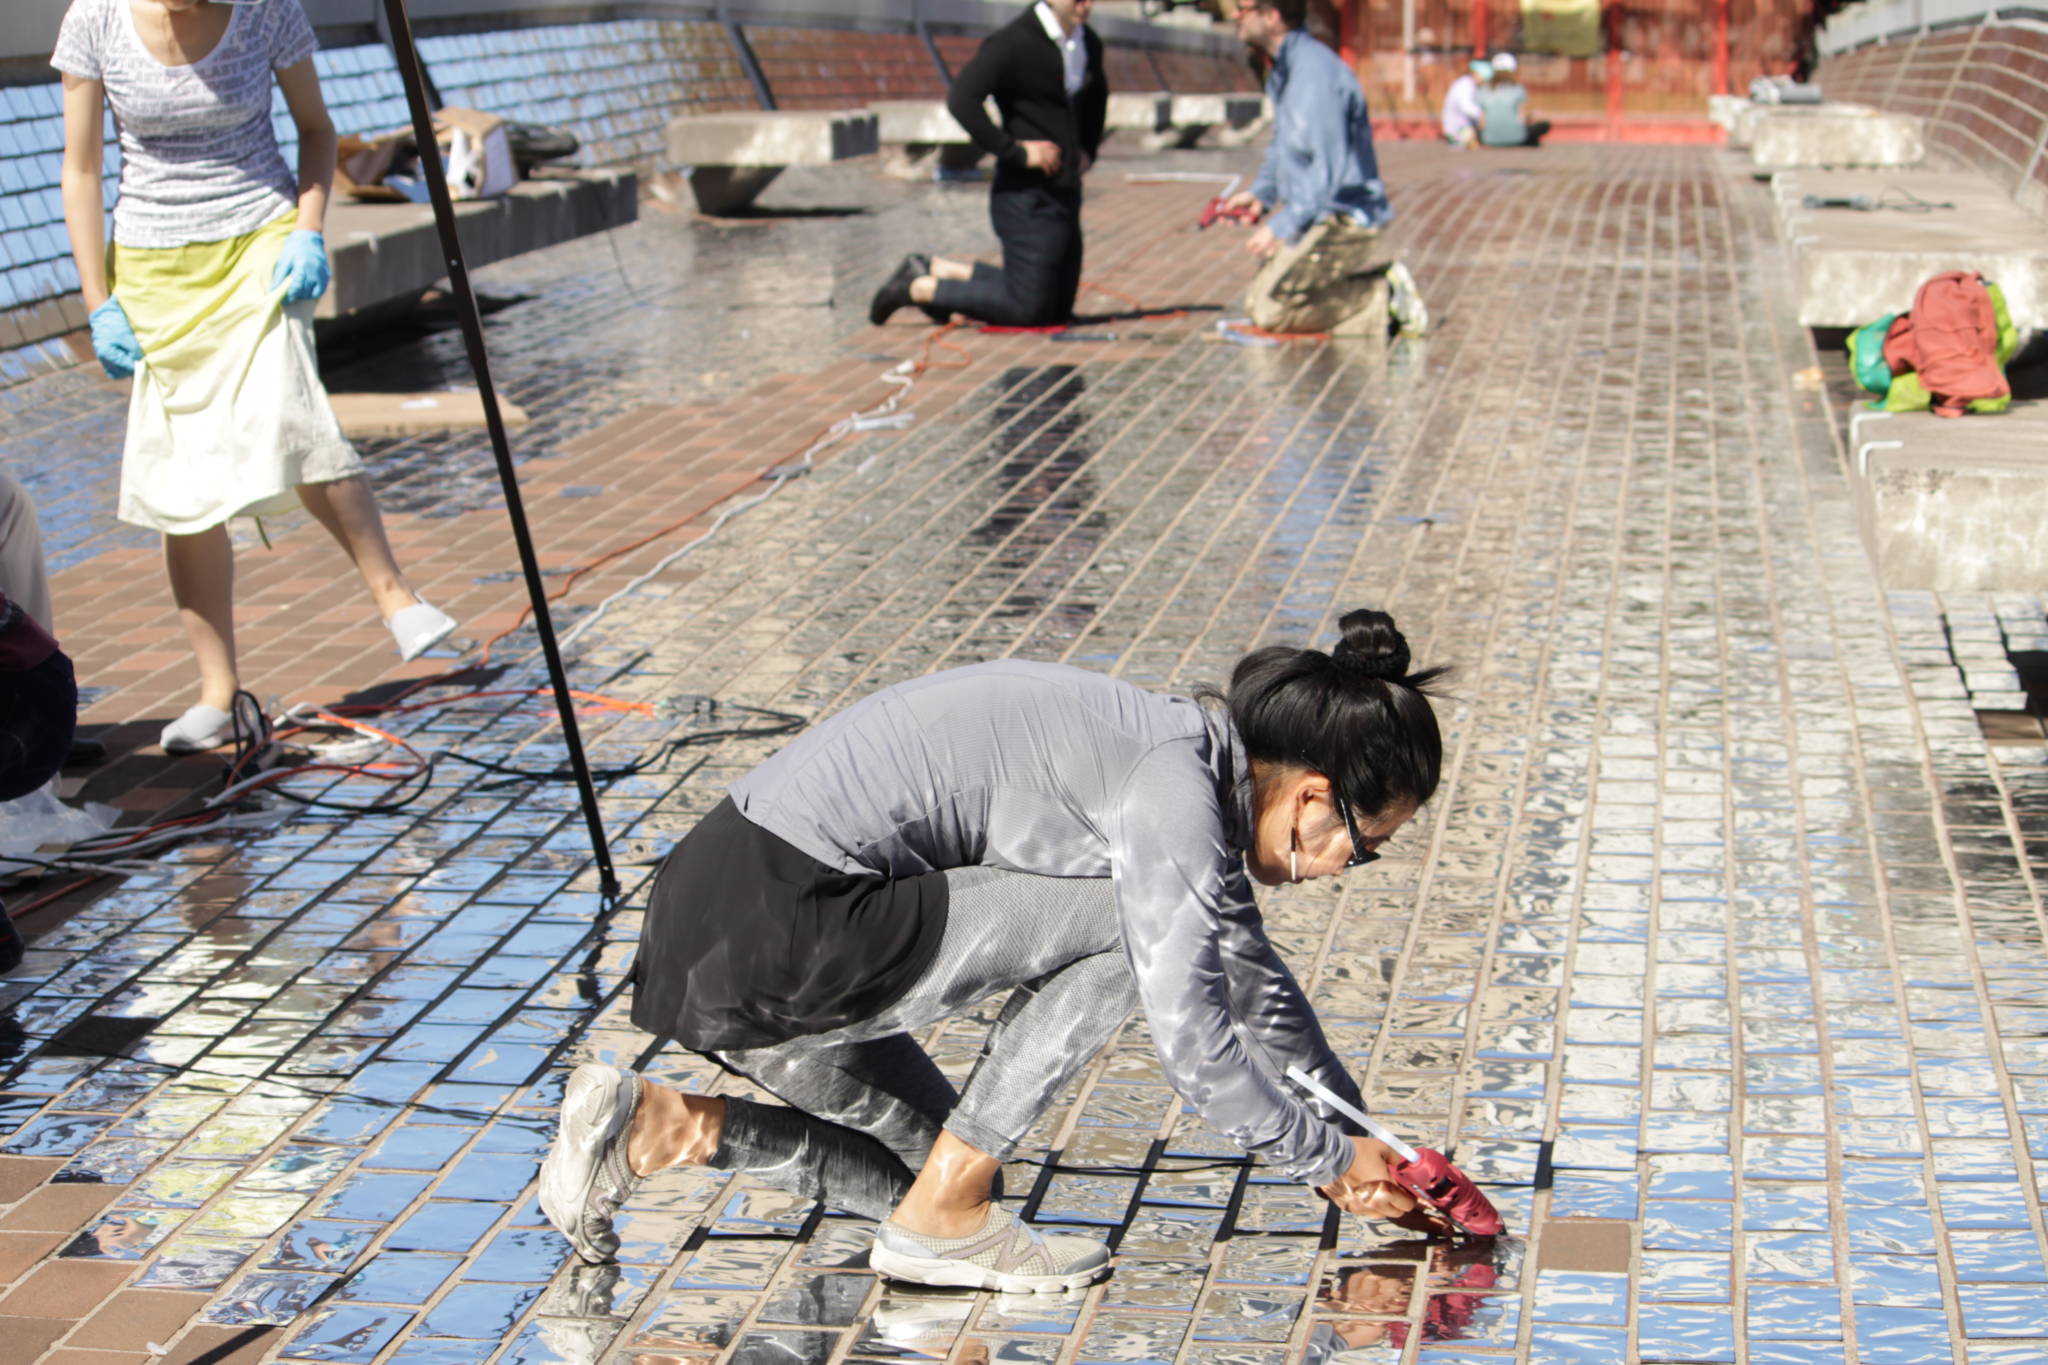 Final touches to Beili Liu's 'Sky Bridge' on Chinatown's Portsmouth Square pedestrian bridge, a project curated by Chen for the Chinese Culture Center in 2015.